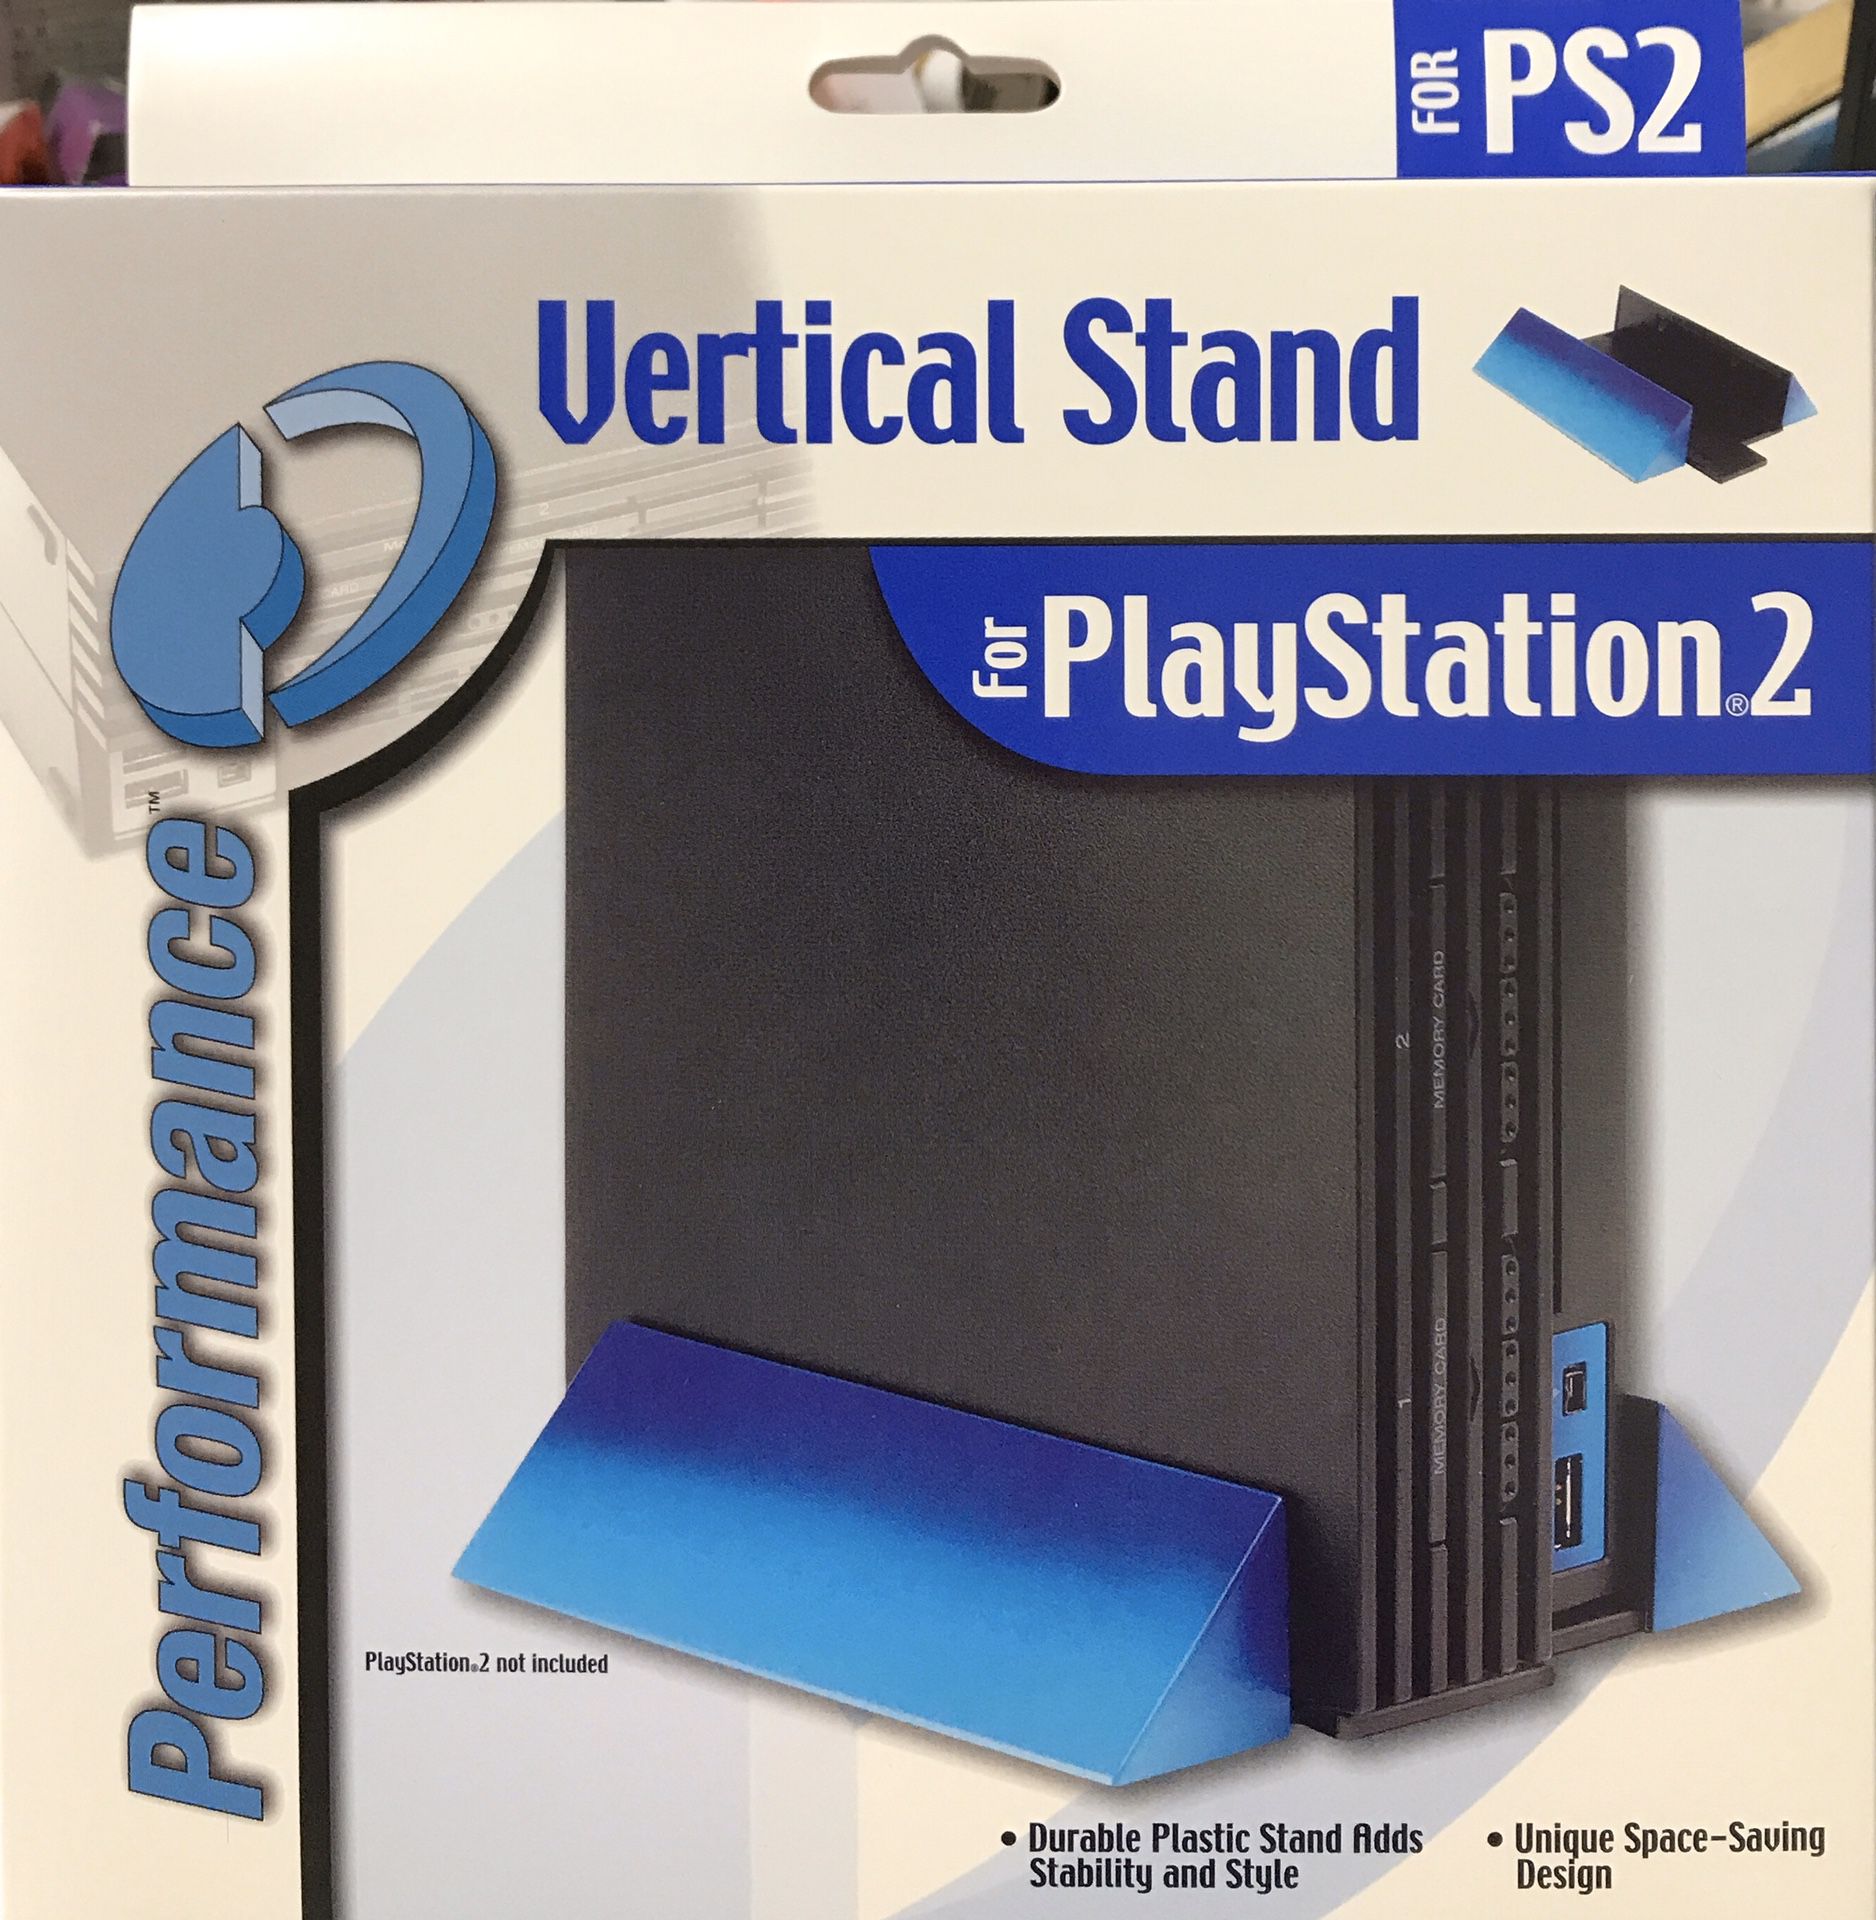 Vertical stand for PlayStation 2 PS2